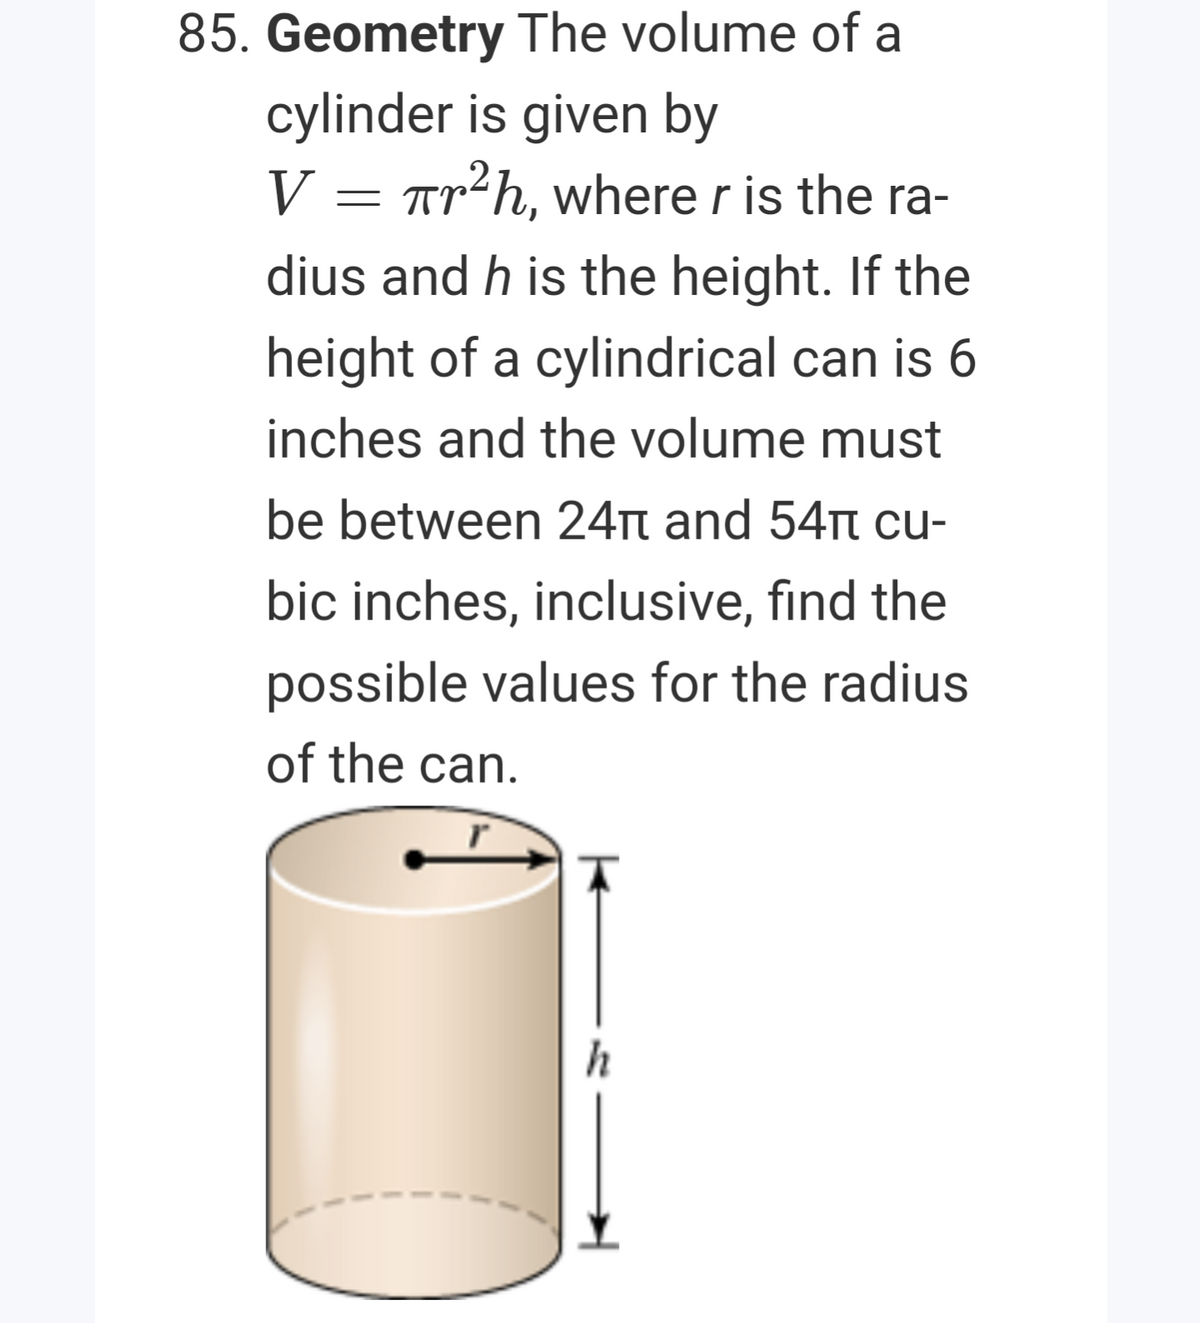 85. Geometry The volume of a
cylinder is given by
V = Tr²h, where r is the ra-
dius and h is the height. If the
height of a cylindrical can is 6
inches and the volume must
be between 24Tt and 54t cu-
bic inches, inclusive, find the
possible values for the radius
of the can.
h
